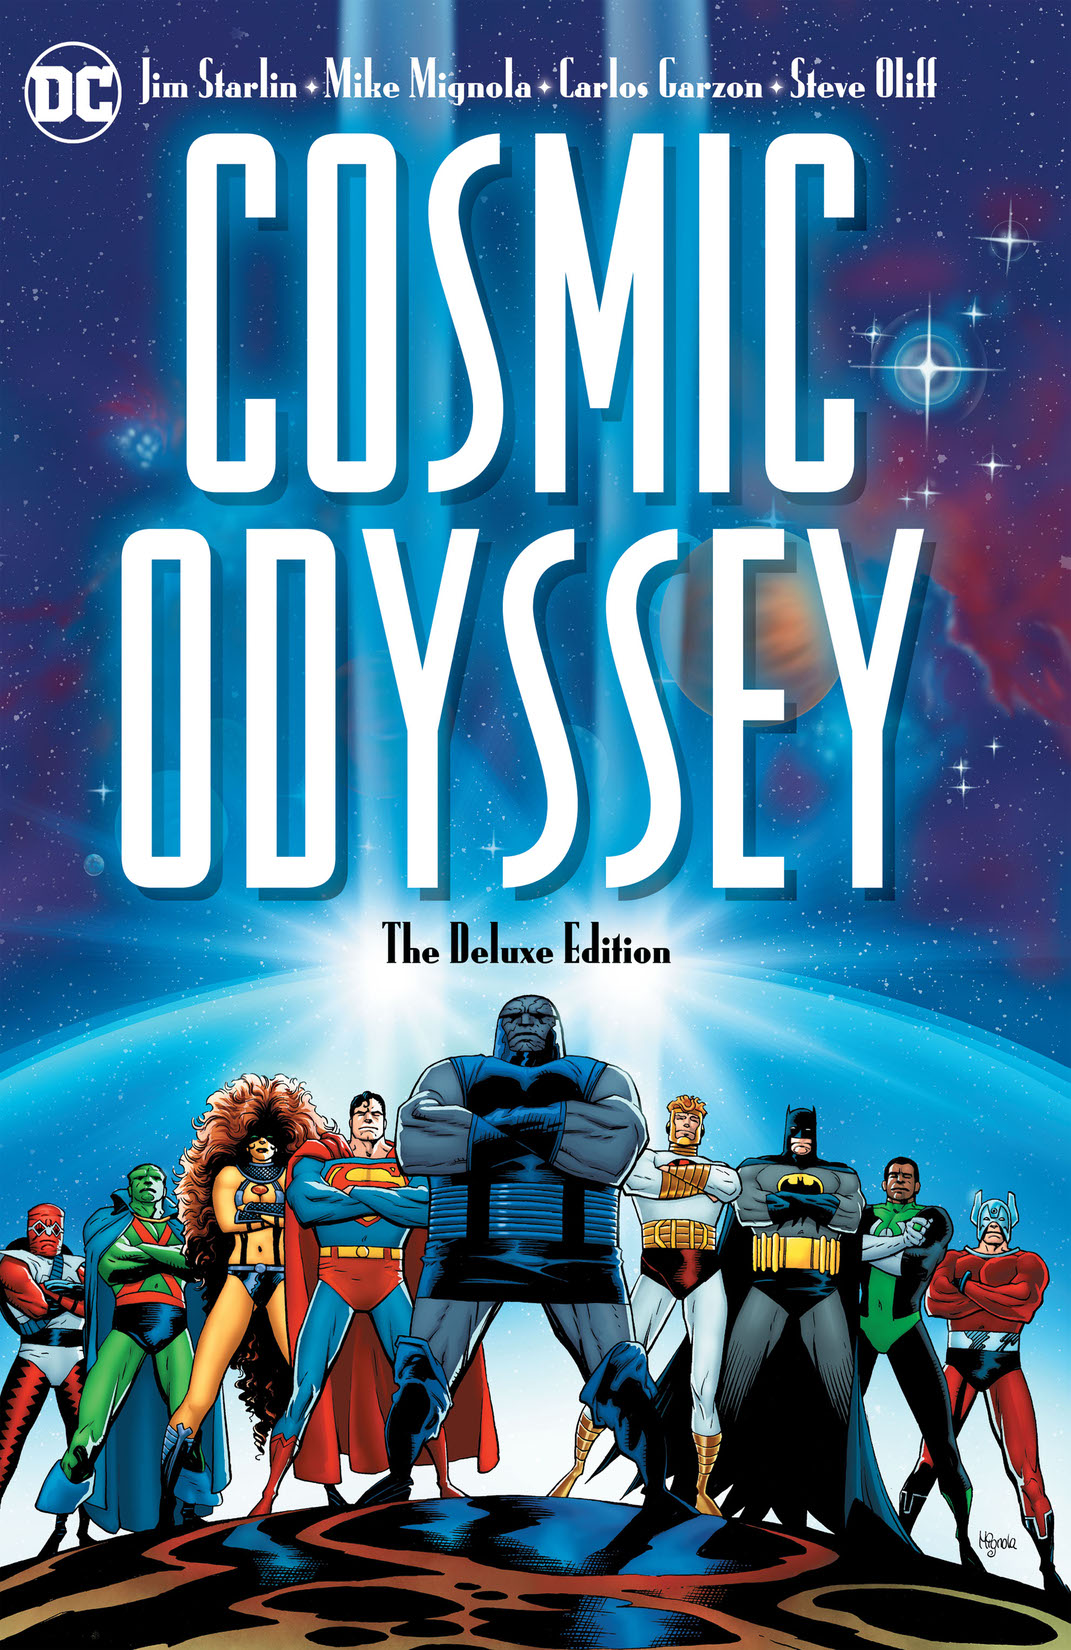 Cosmic Odyssey: The Deluxe Edition preview images